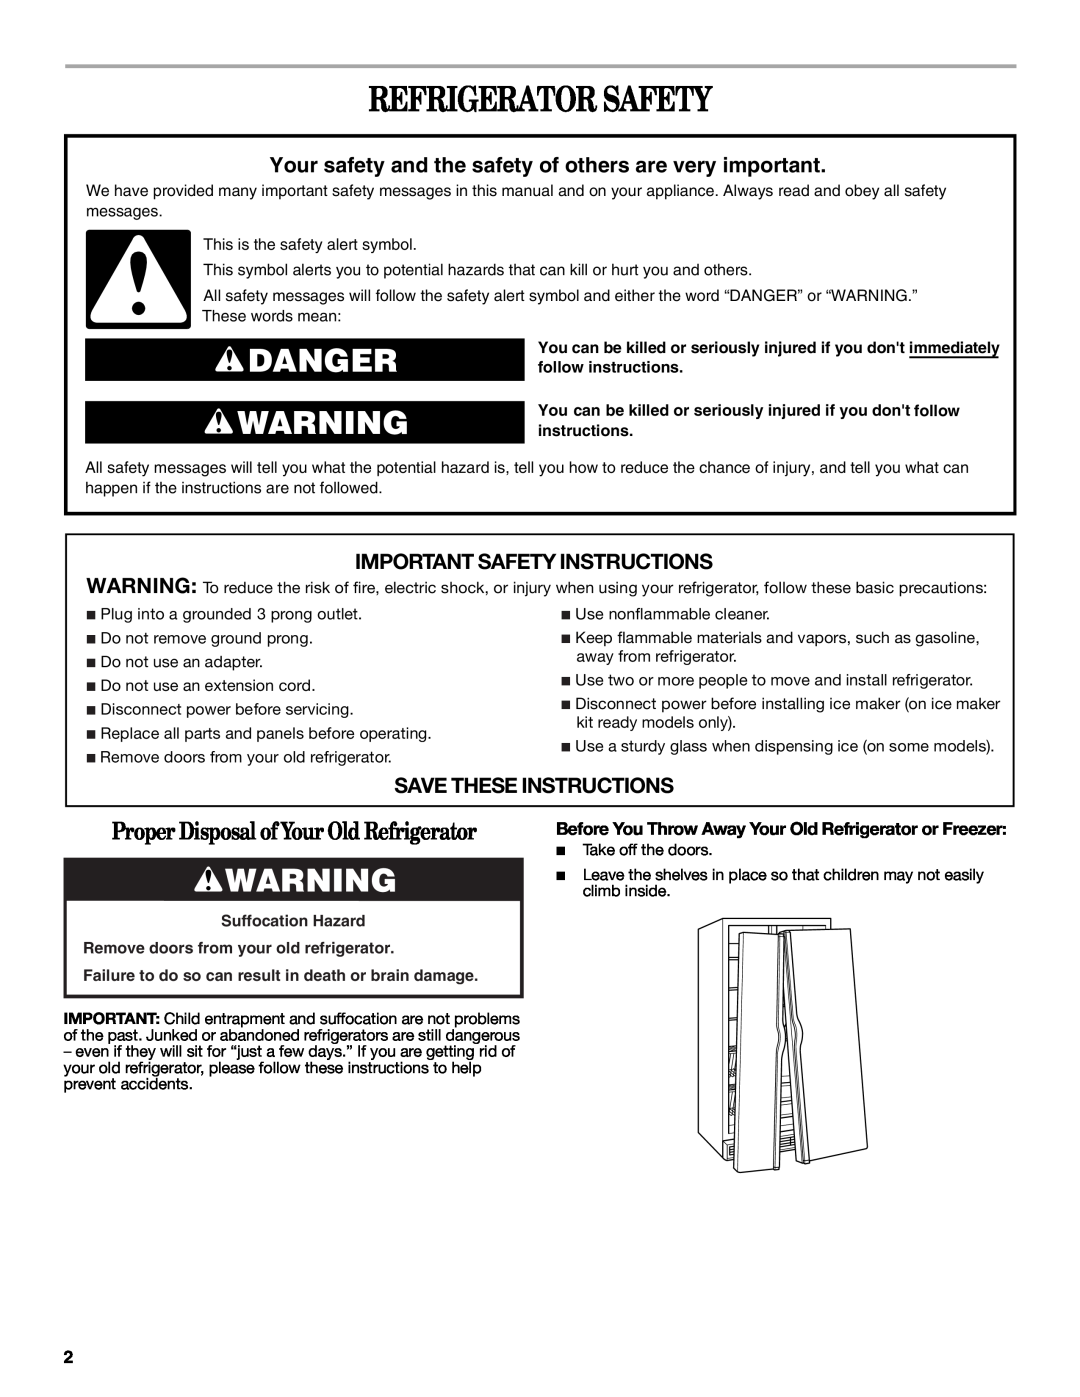 Whirlpool GD5RHAXRQ00, ED2KVEXVQ01 Refrigerator Safety, Danger, Important Safety Instructions, Save These Instructions 